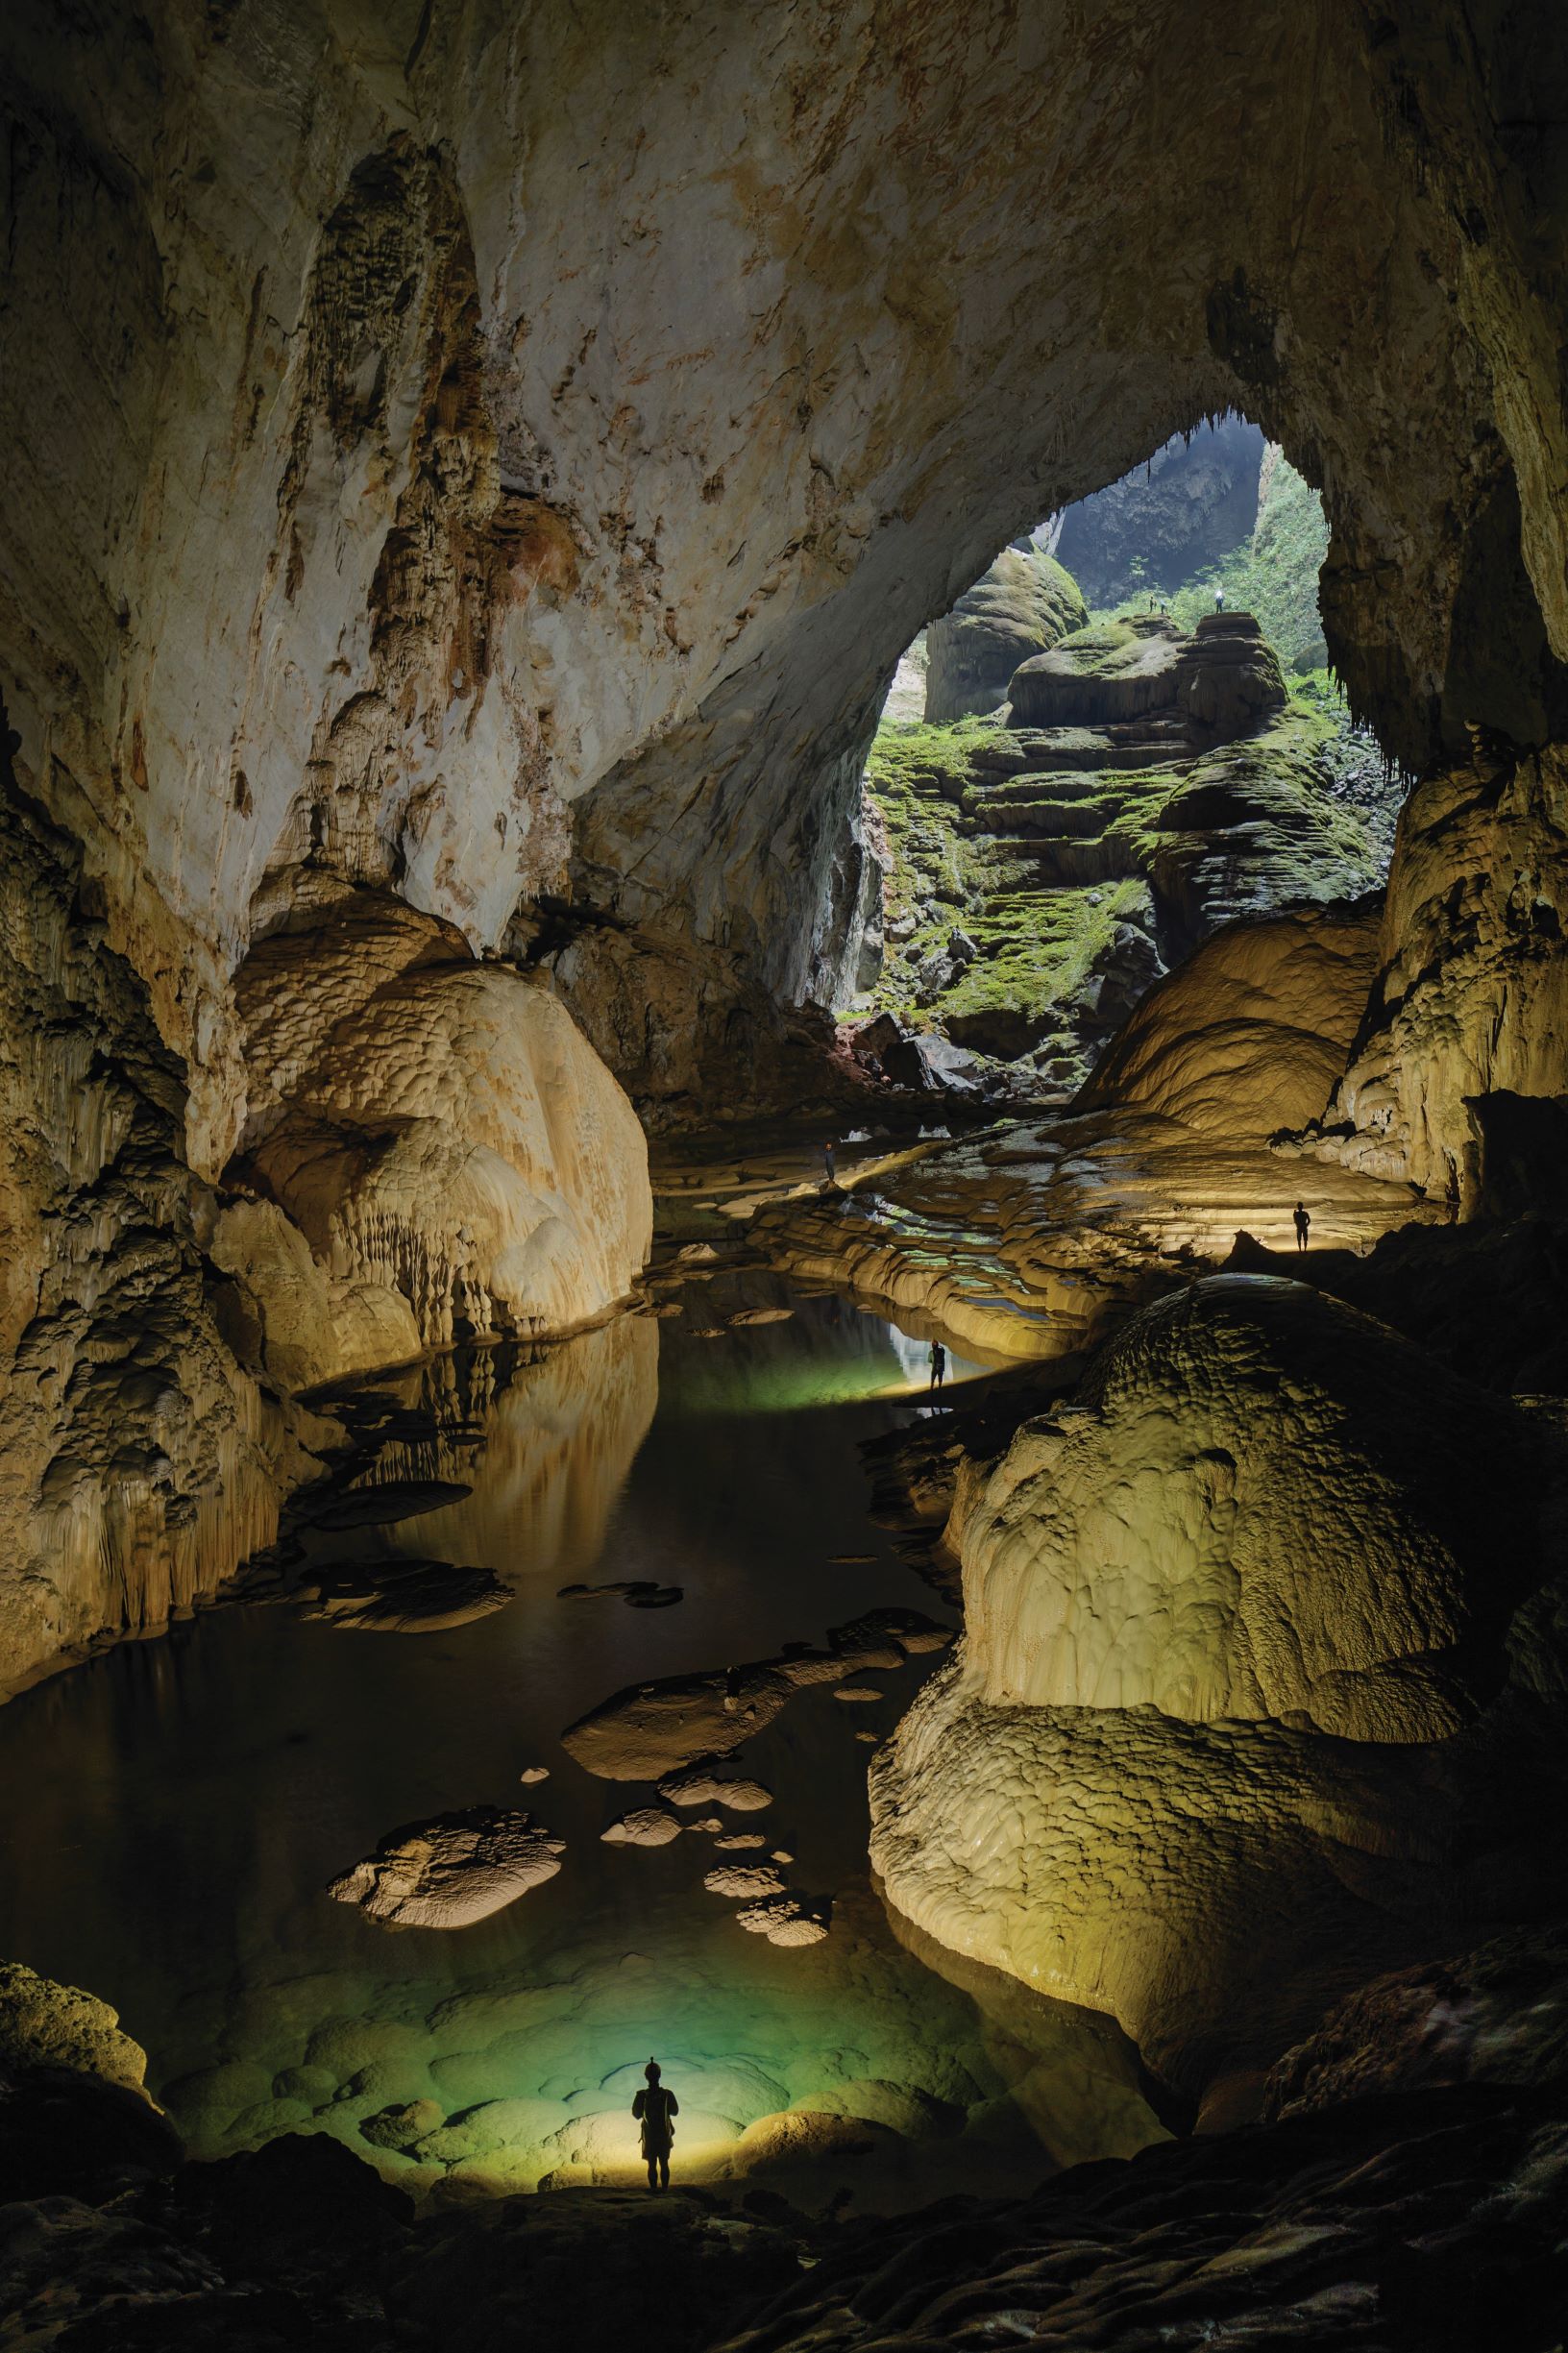 Hang Son Doong - World's largest cave • Oxalis Adventure